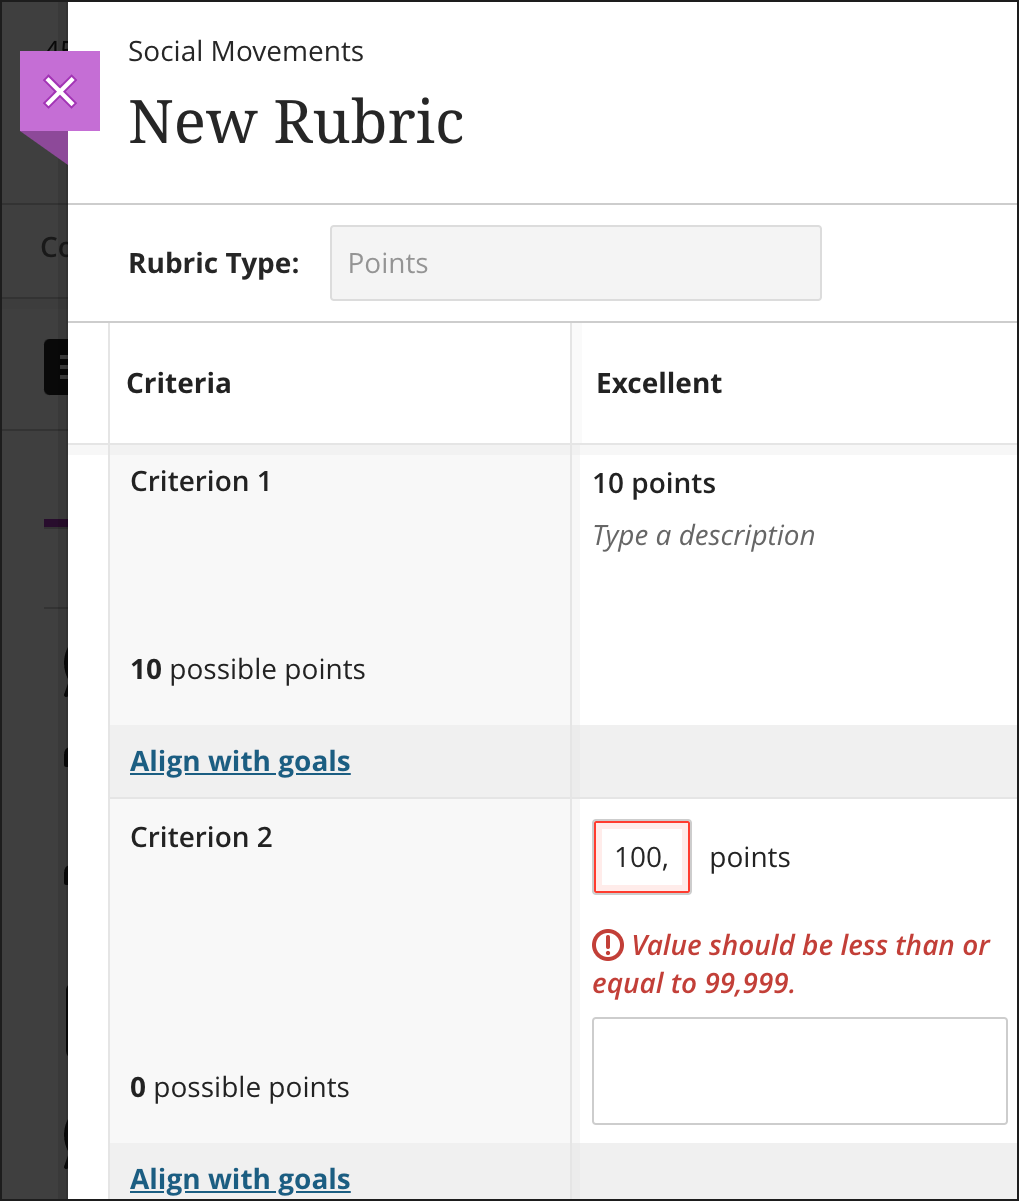 New rubric with point-based criterion. Warning sign shows Value should be less than or equal to 99,999.